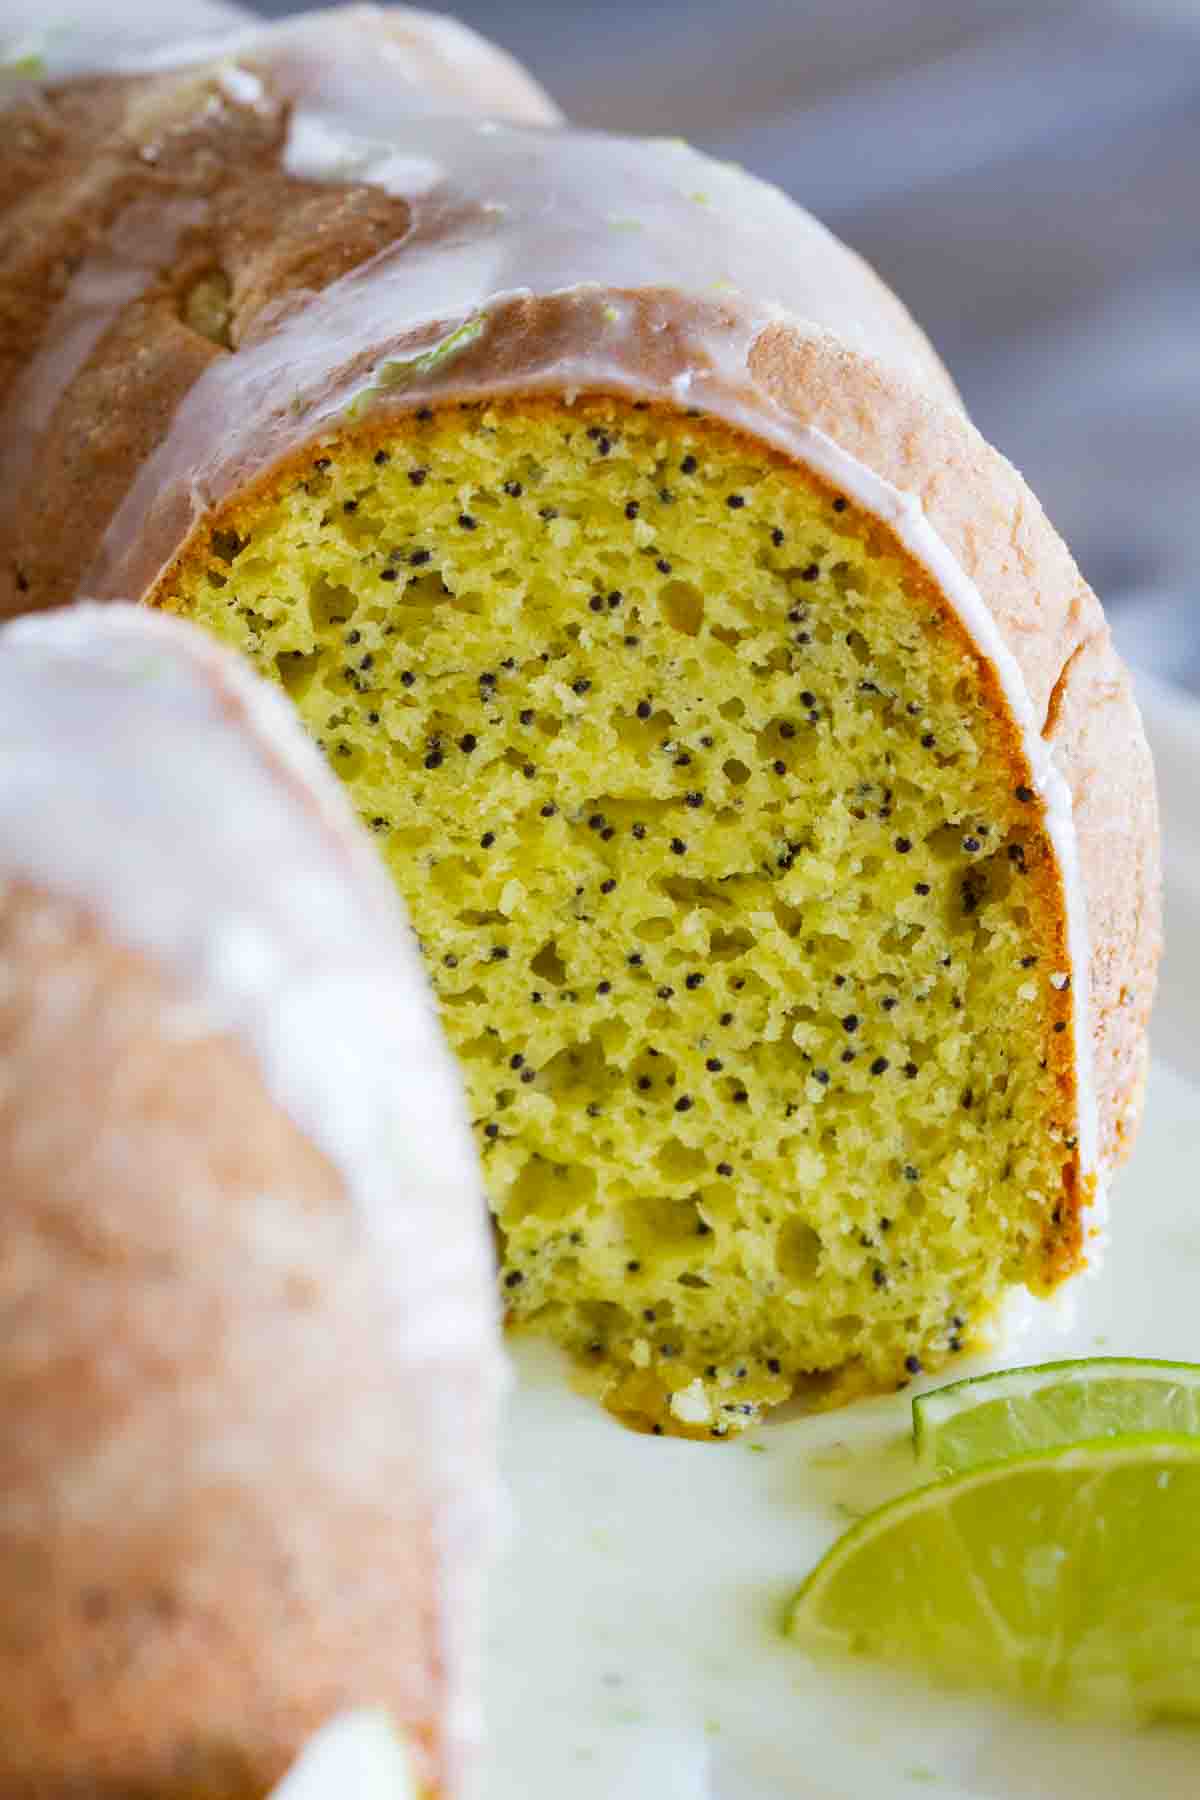 Lime Poppy Seed Cake with a slice taken to show inside of cake